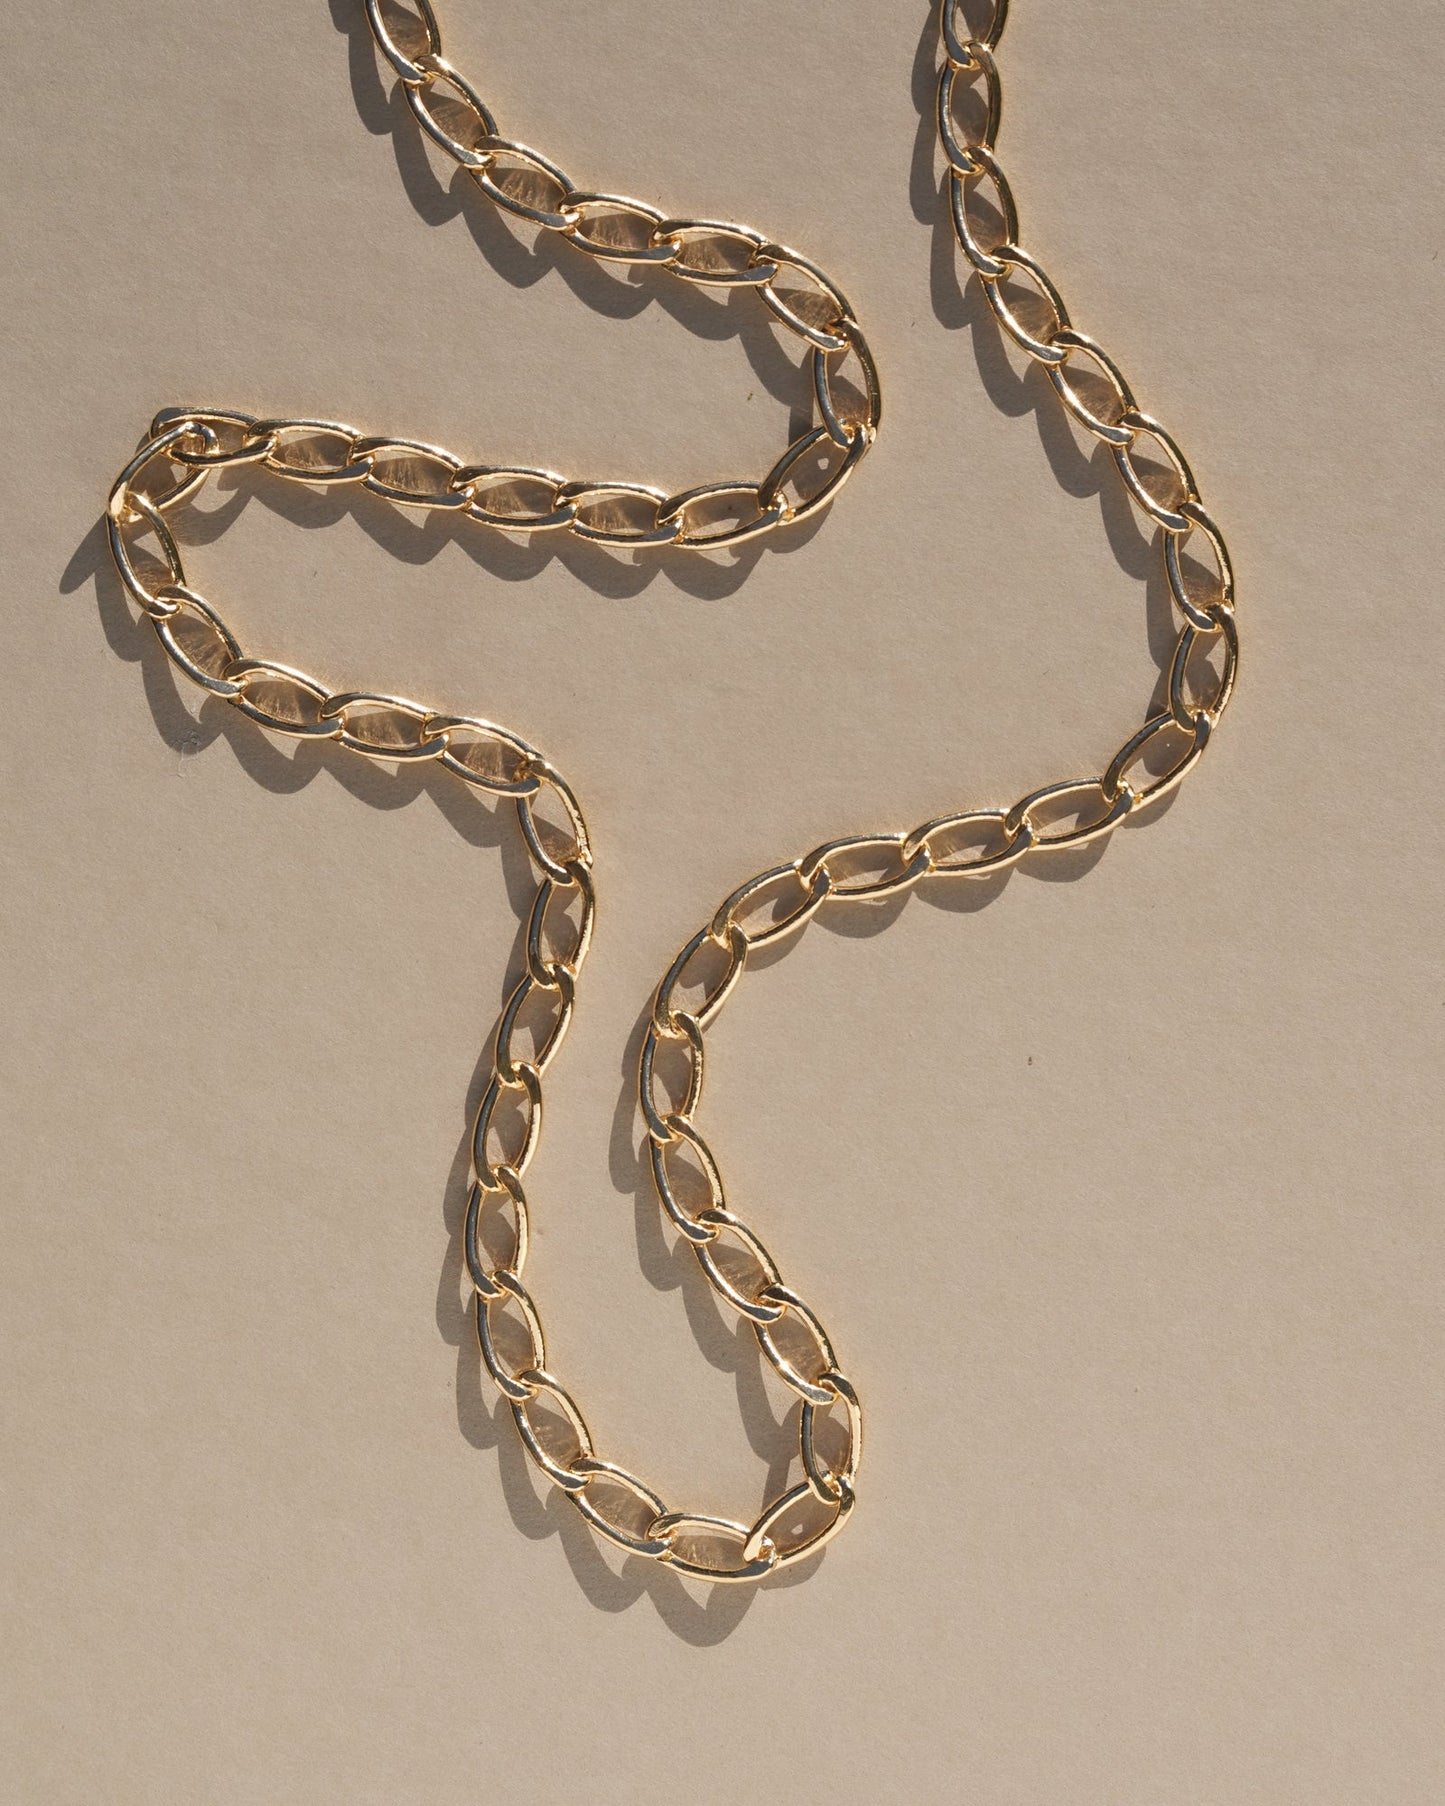 Reinterpreting a classic style with a bold modern twist, this chunky chain adds some extra style to the everyday. A sleek, minimal look that’s perfect for layering, handmade with gold oval rings.    Handmade in the Santa Cruz Mountains.